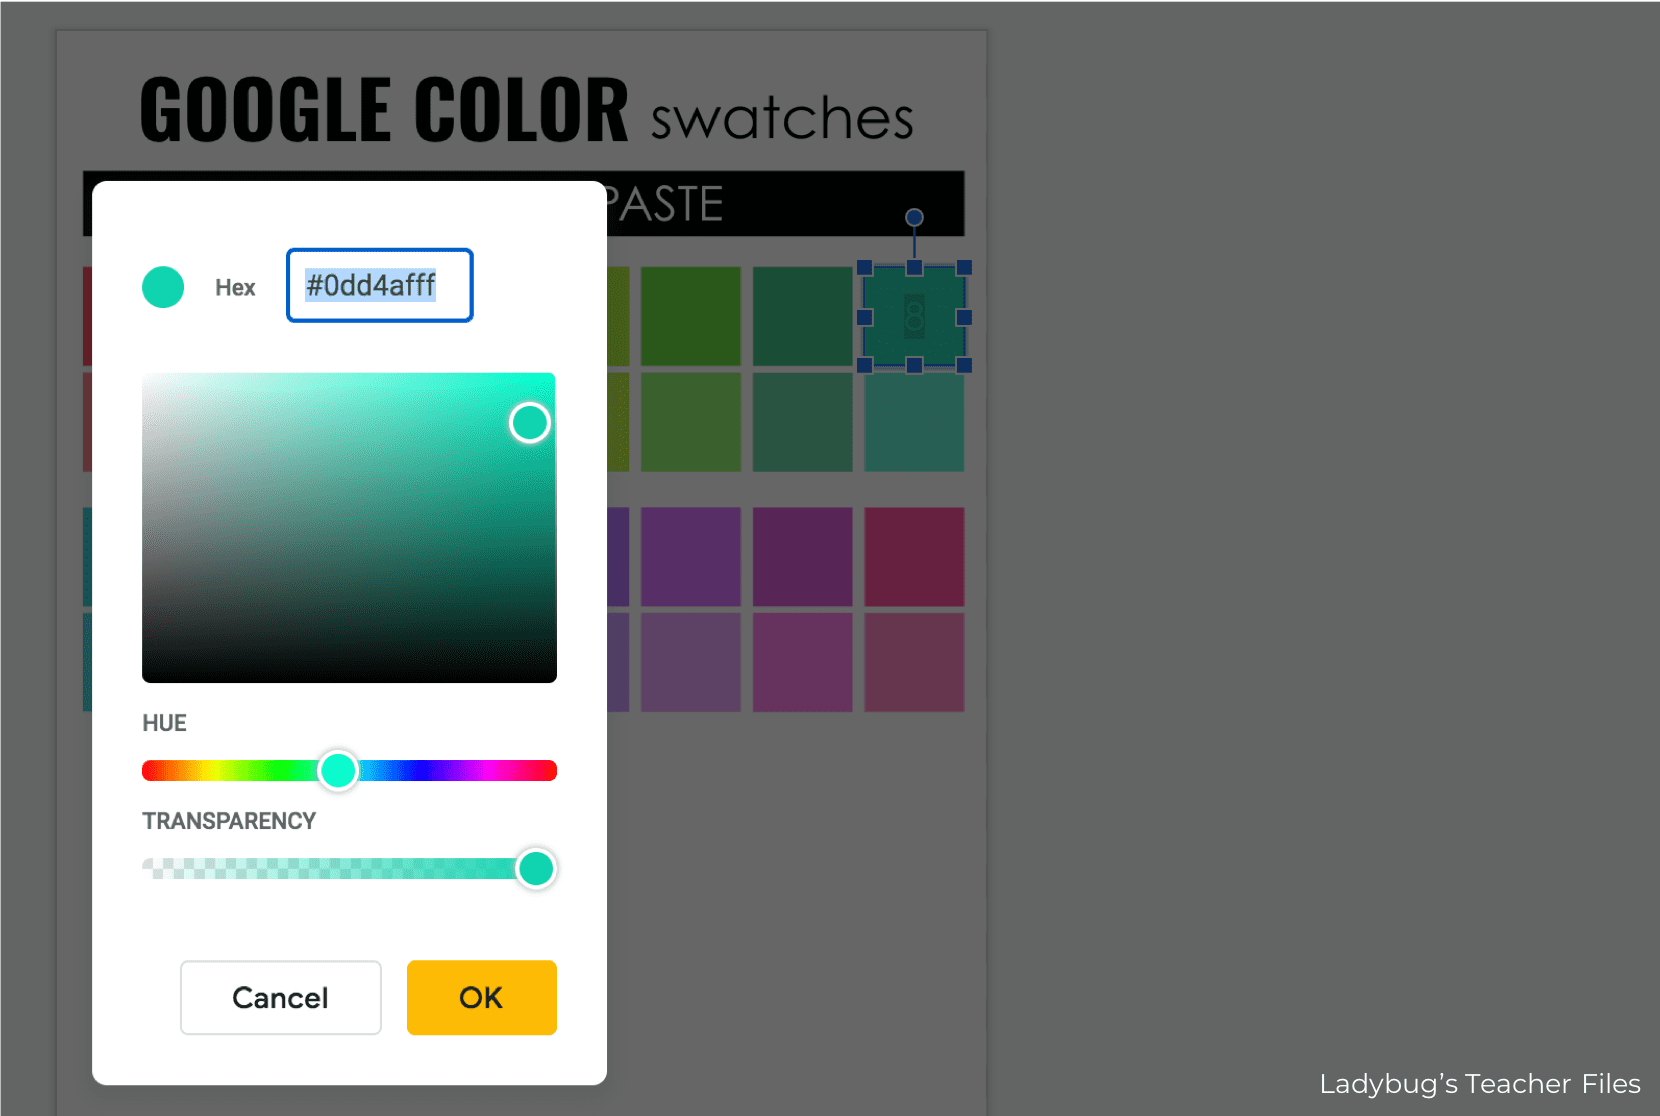 move the color gradient and adjust the slider until you get the shade you like